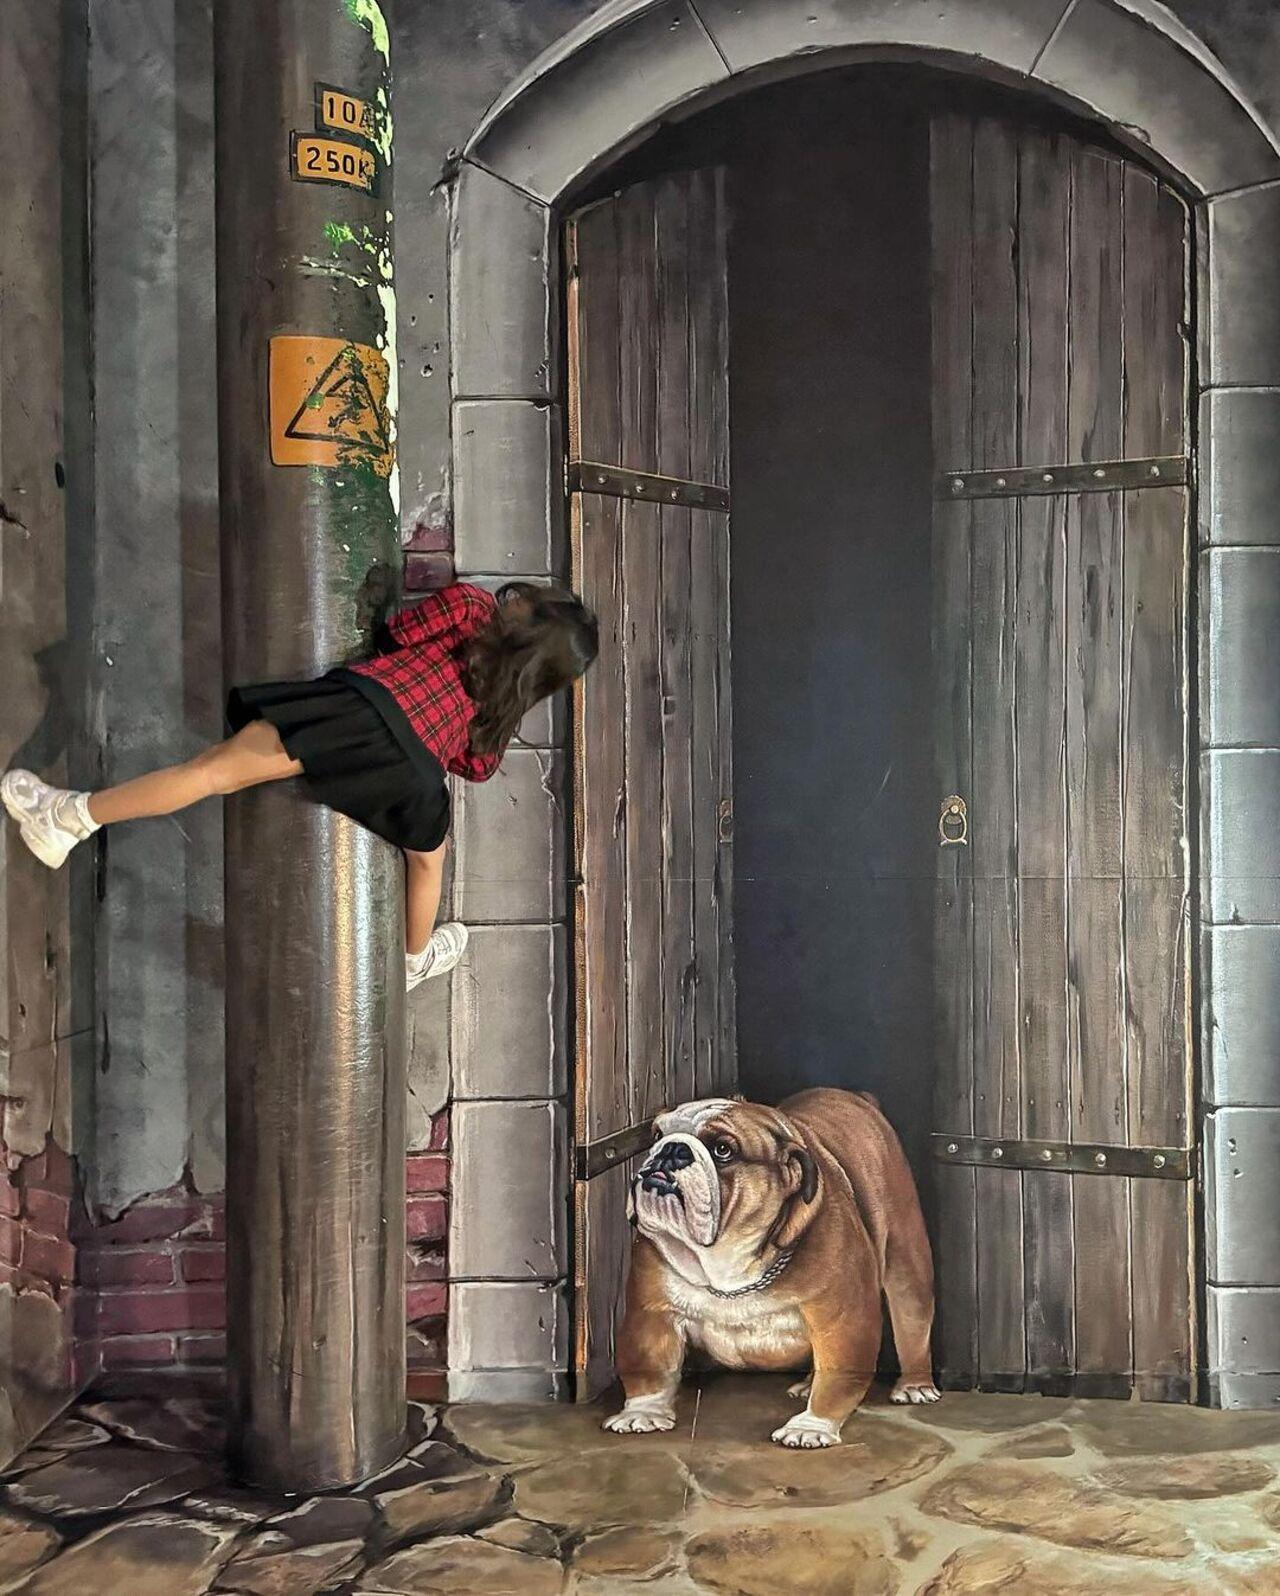 Little Inaaya clings on to dear life in this art depiction of a bulldog scaring the living daylights out of her!